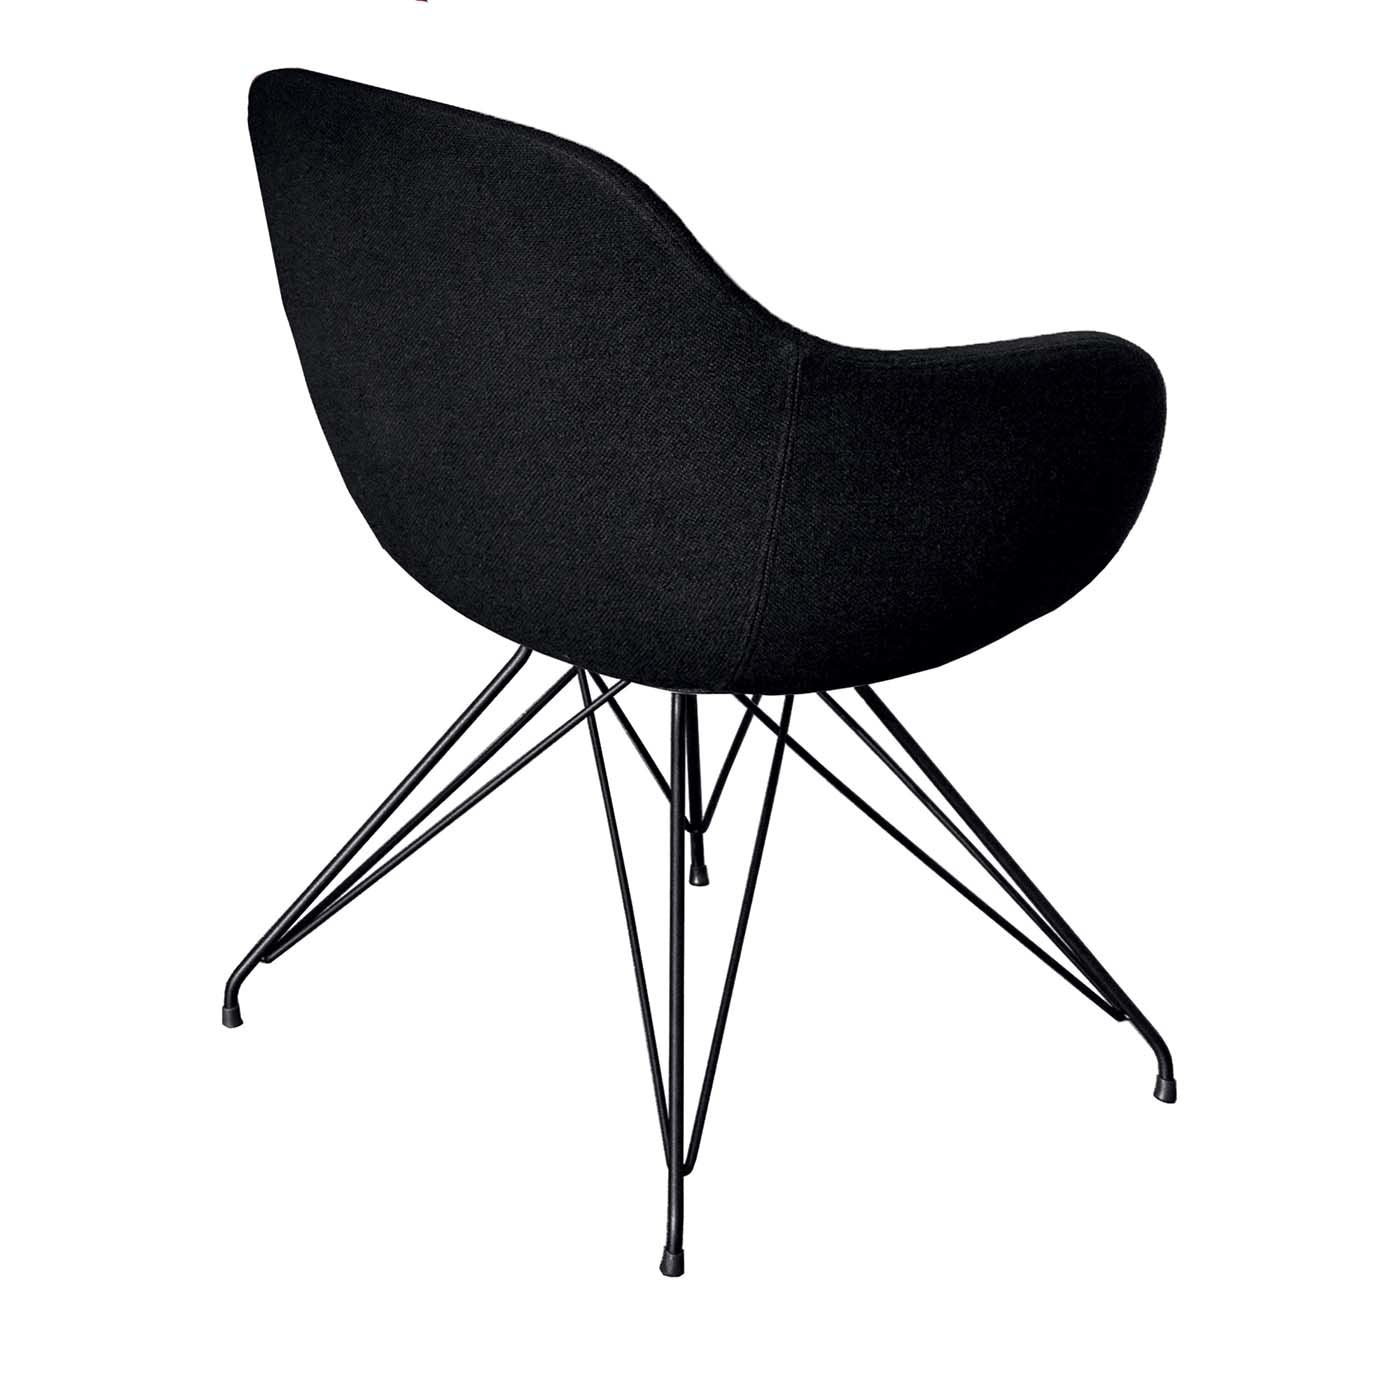 Cadira Wire Black Chair with Armrests - Alternative view 1